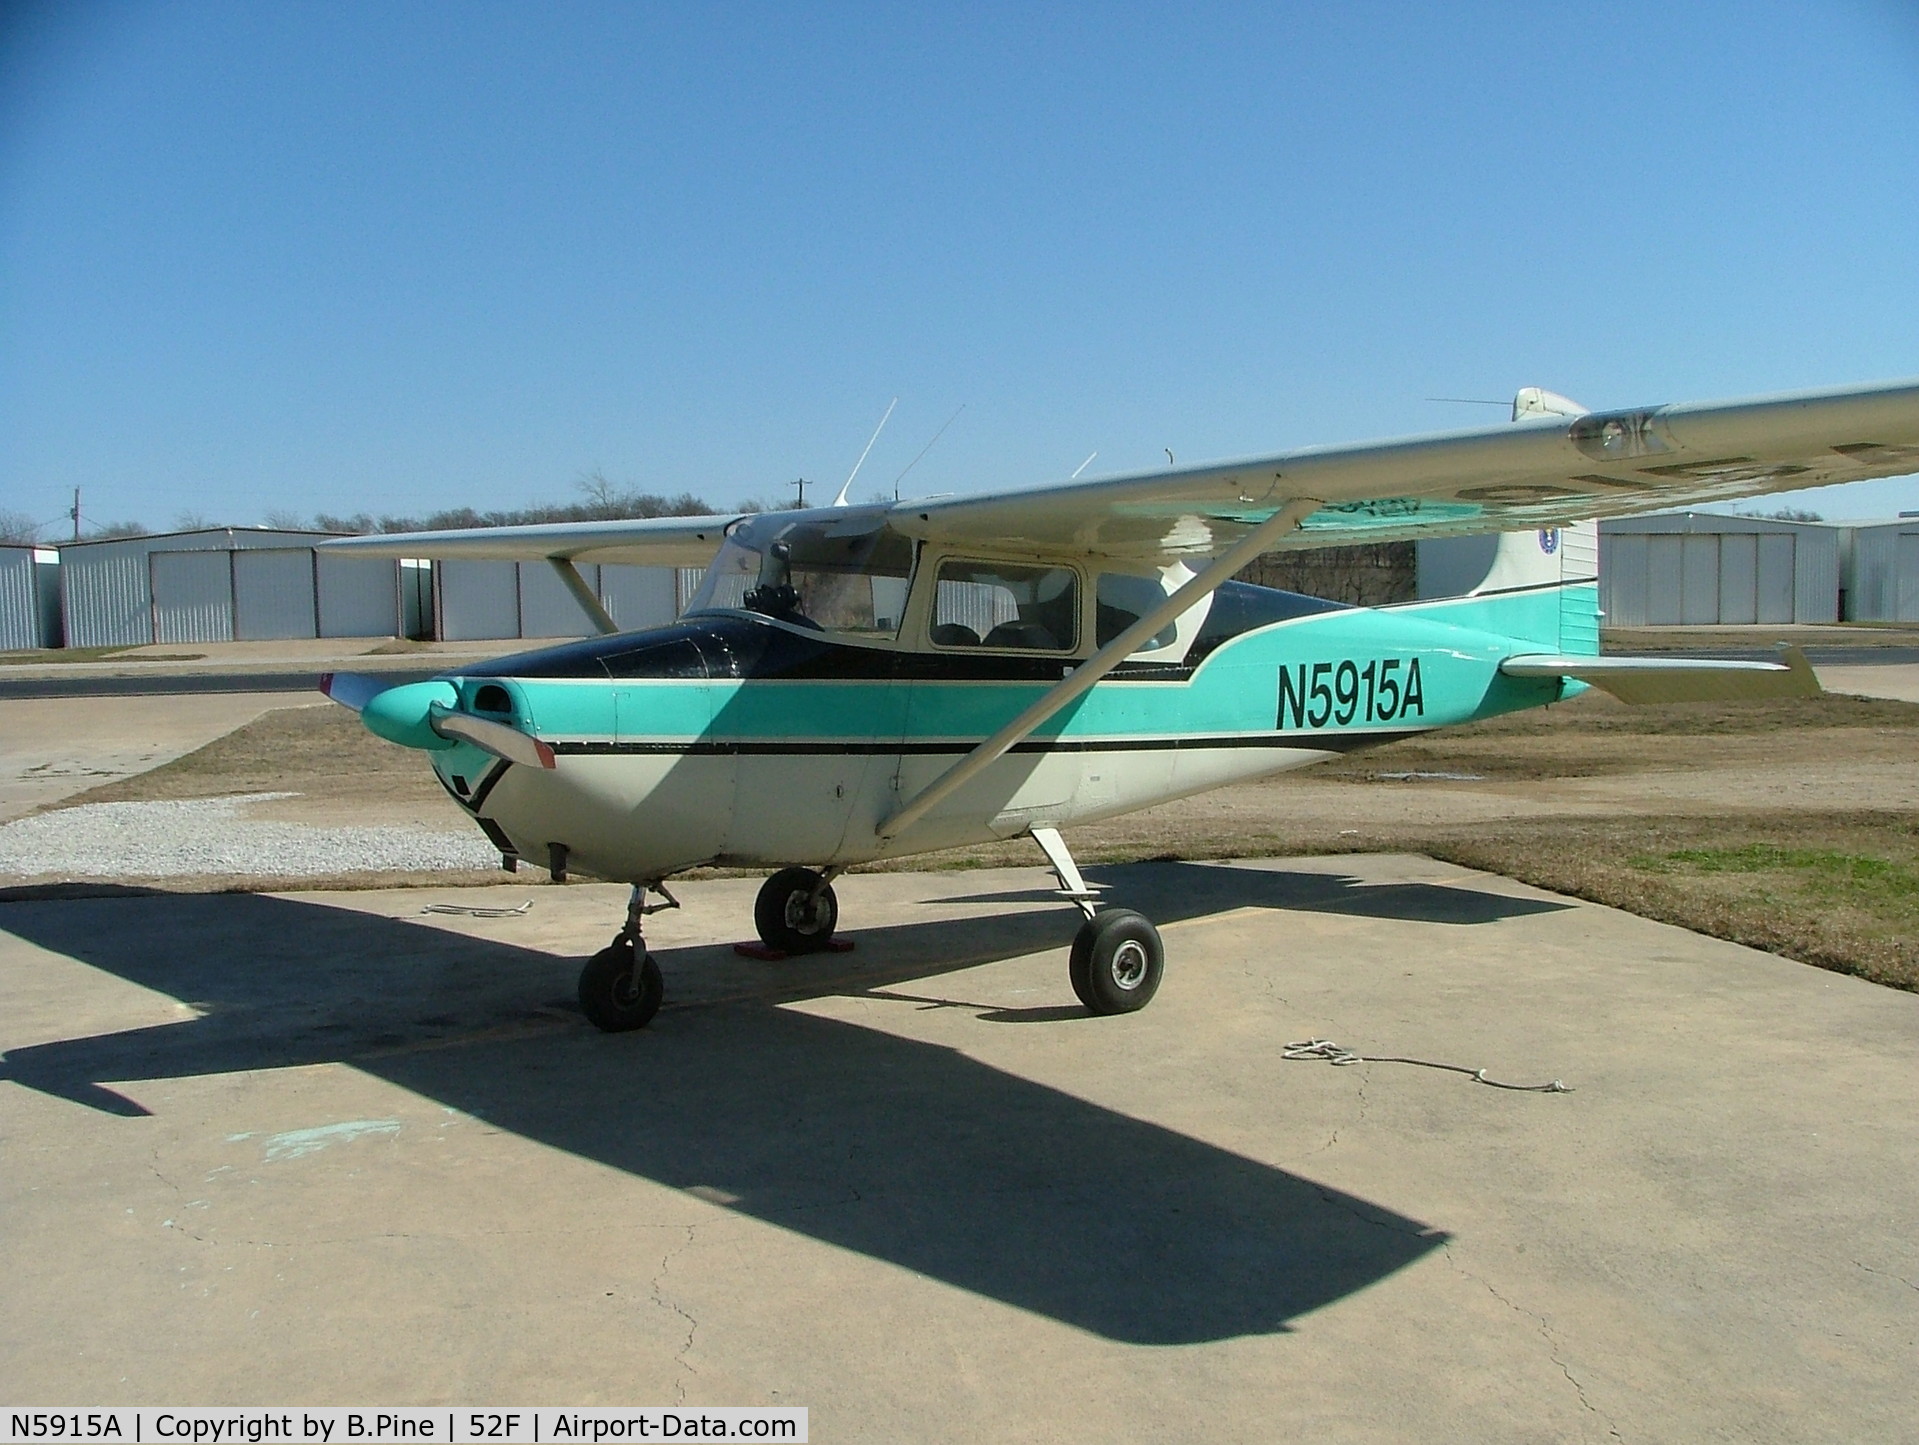 N5915A, 1956 Cessna 172 C/N 28515, Aircraft at Northwest Regional Airport in Roanoke, TX